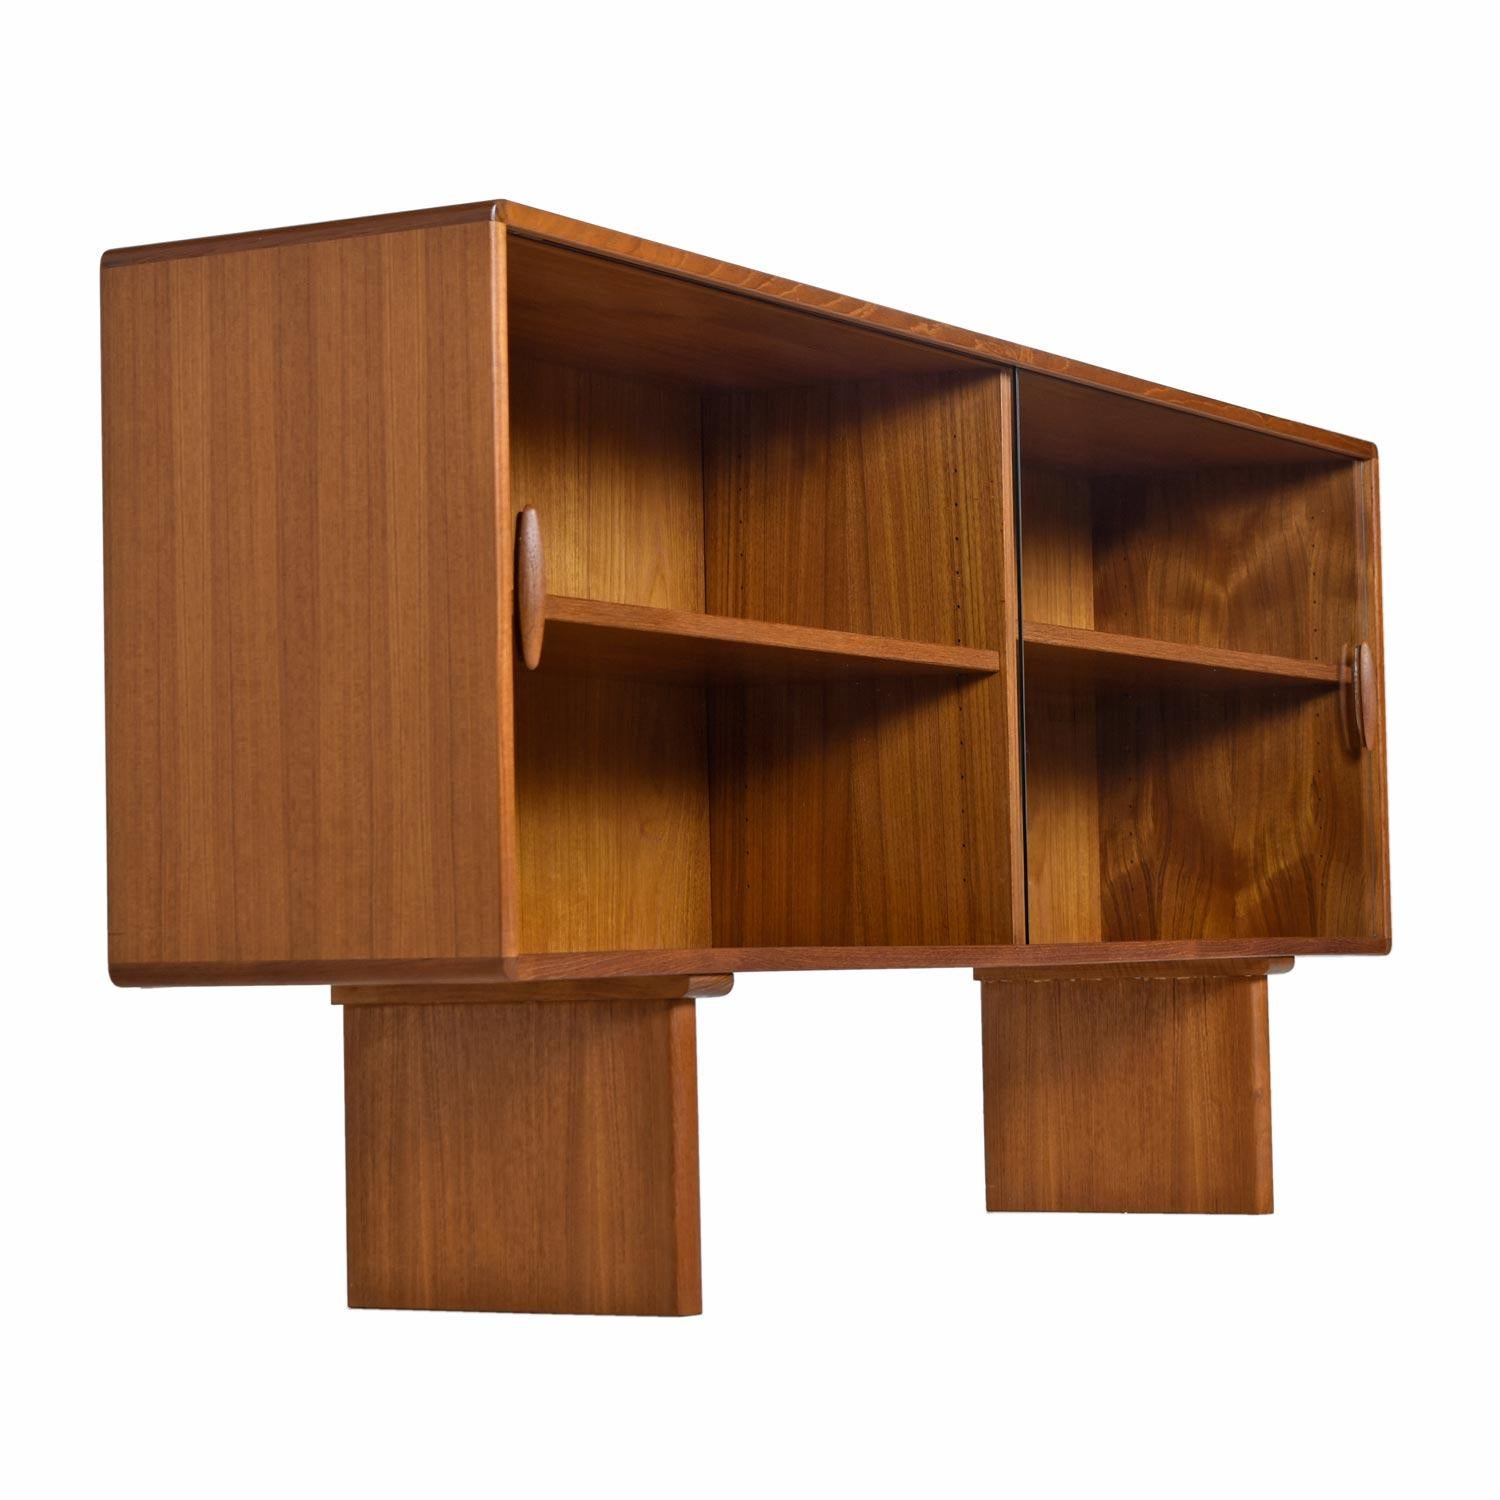 Midcentury Scandinavian Modern Danish teak bookcase console cabinet credenza by Dyrlund. Made in Denmark, vintage 1970s, teak wood construction. The unit is finished on back side and can be used as a room divider. This credenza as a prime example of